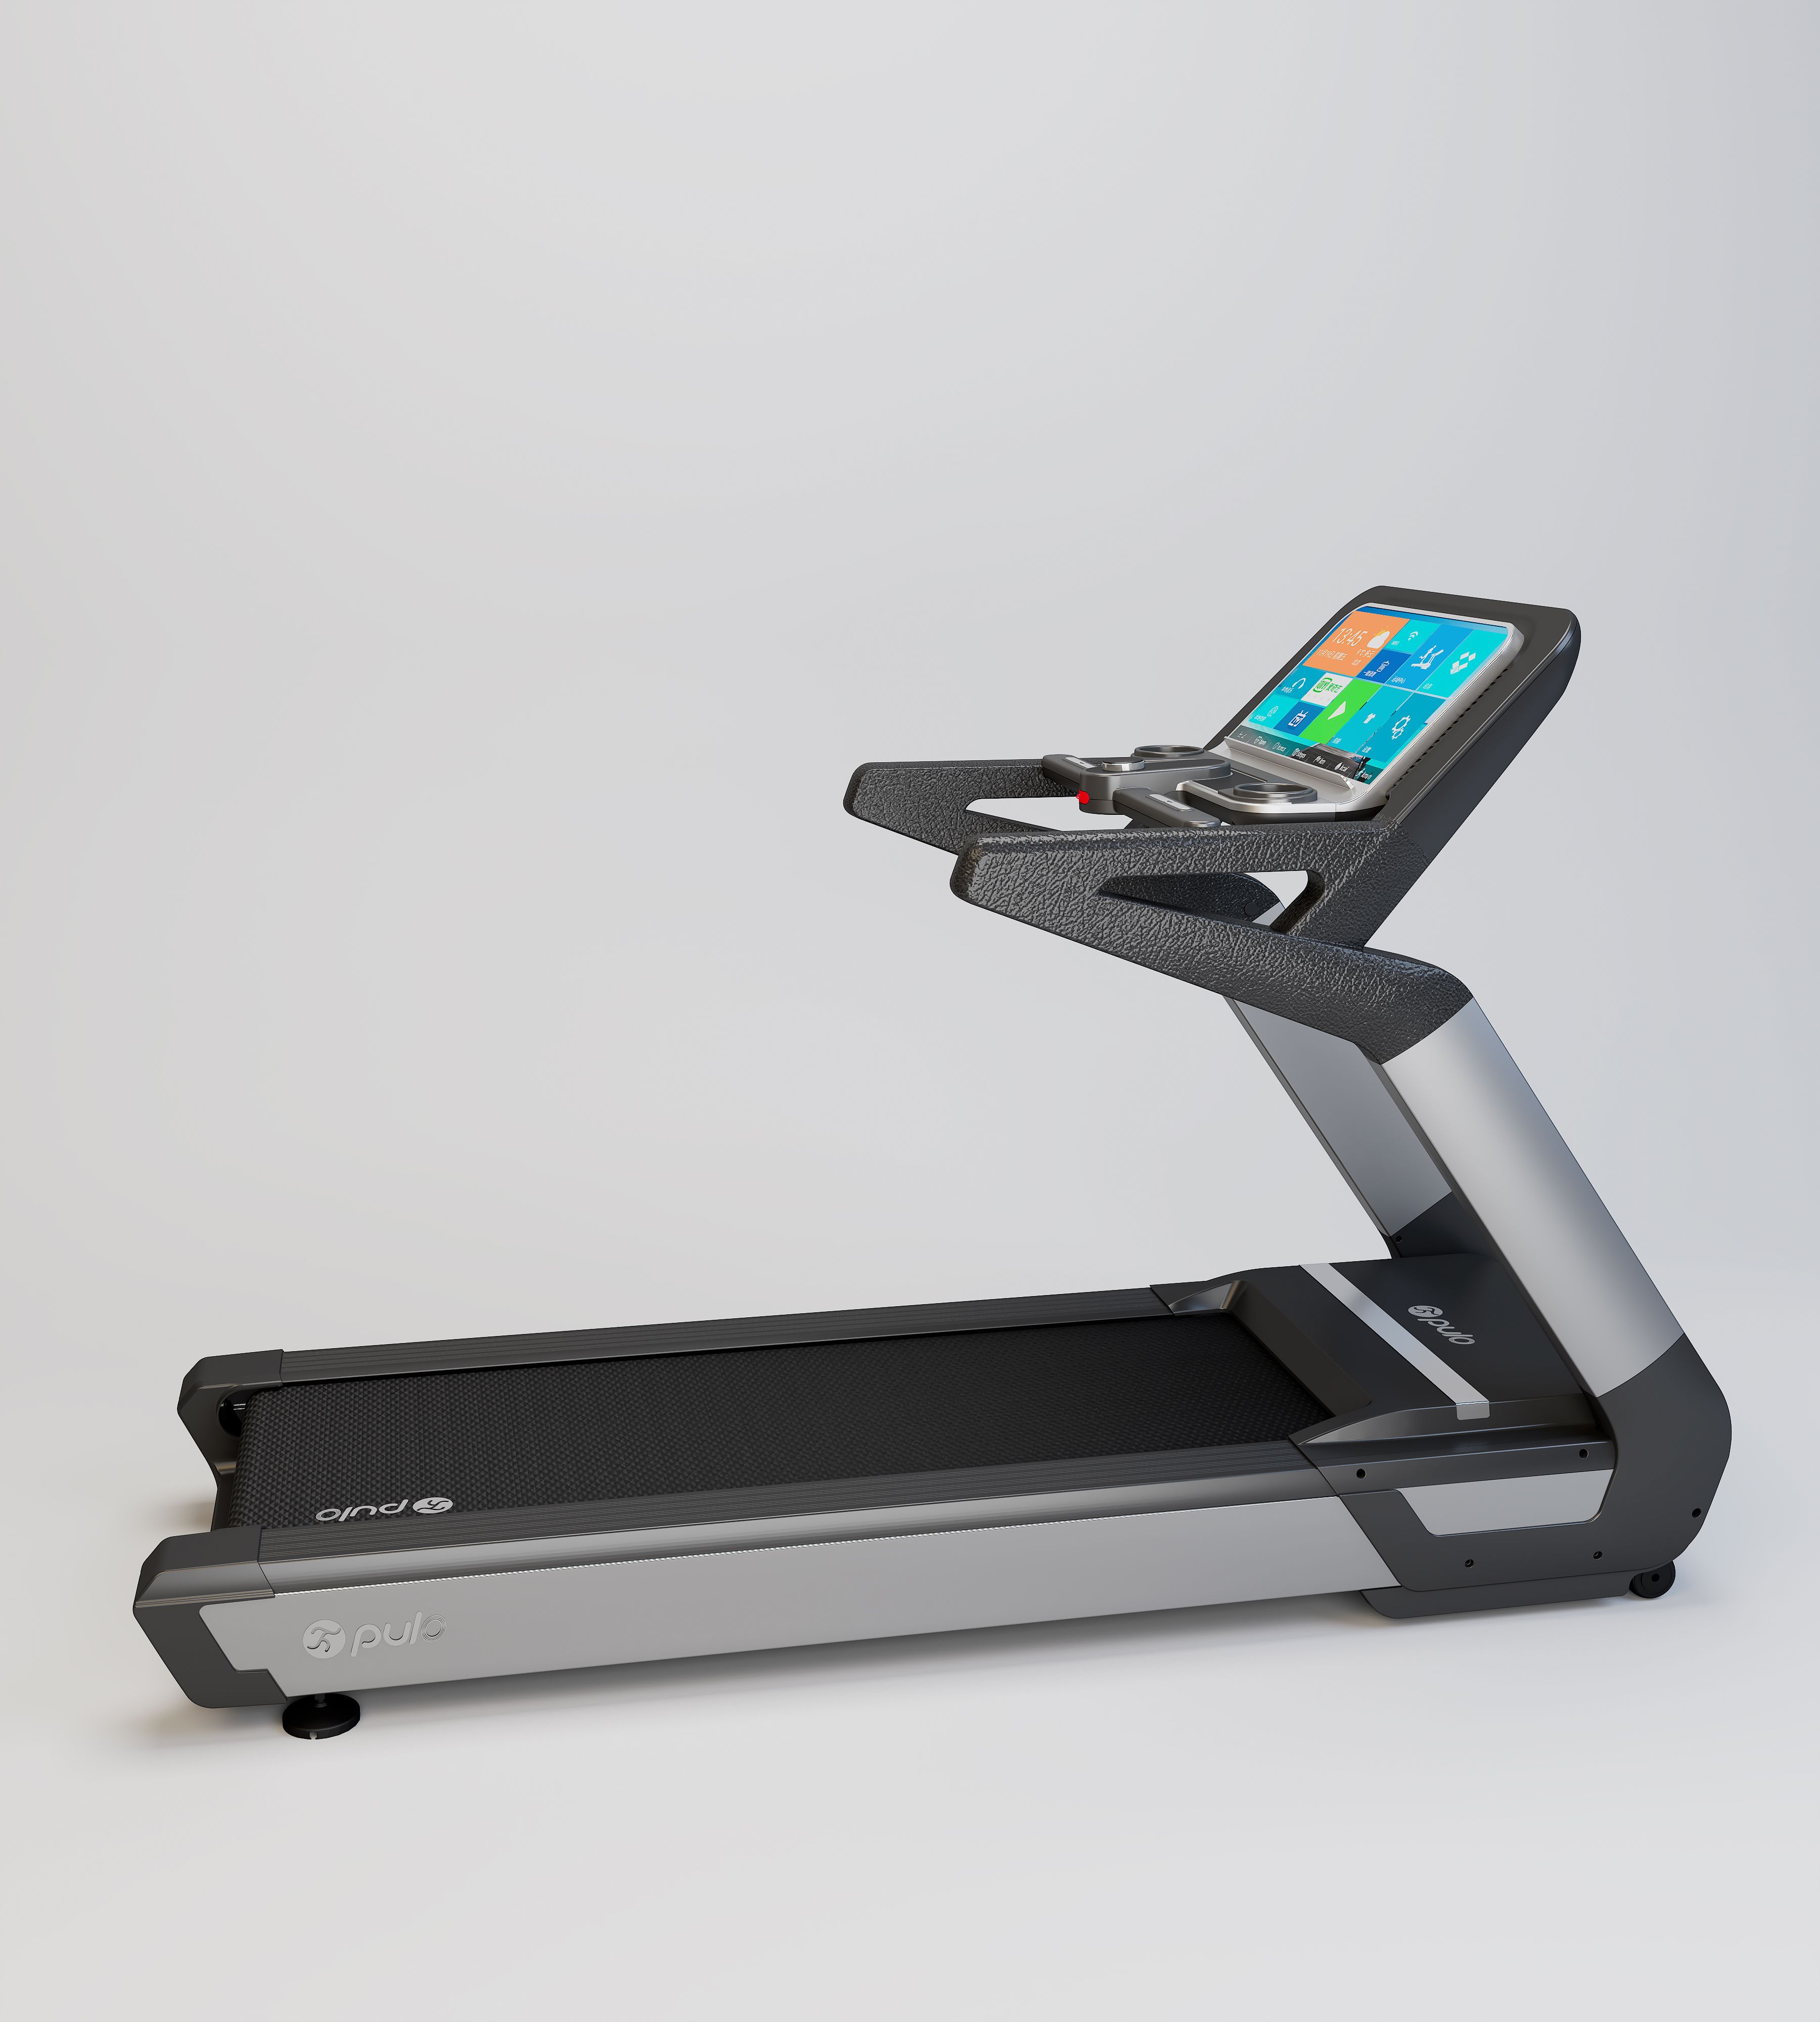 China Wholesale Treadmill With Speaker Factories Pricelist - PX01T560-L Gym Fitness Equipment Running Machine Commercial Grade Treadmill 2.5HP Motor With LCD Screen and 560 Belt Size  – Puluo